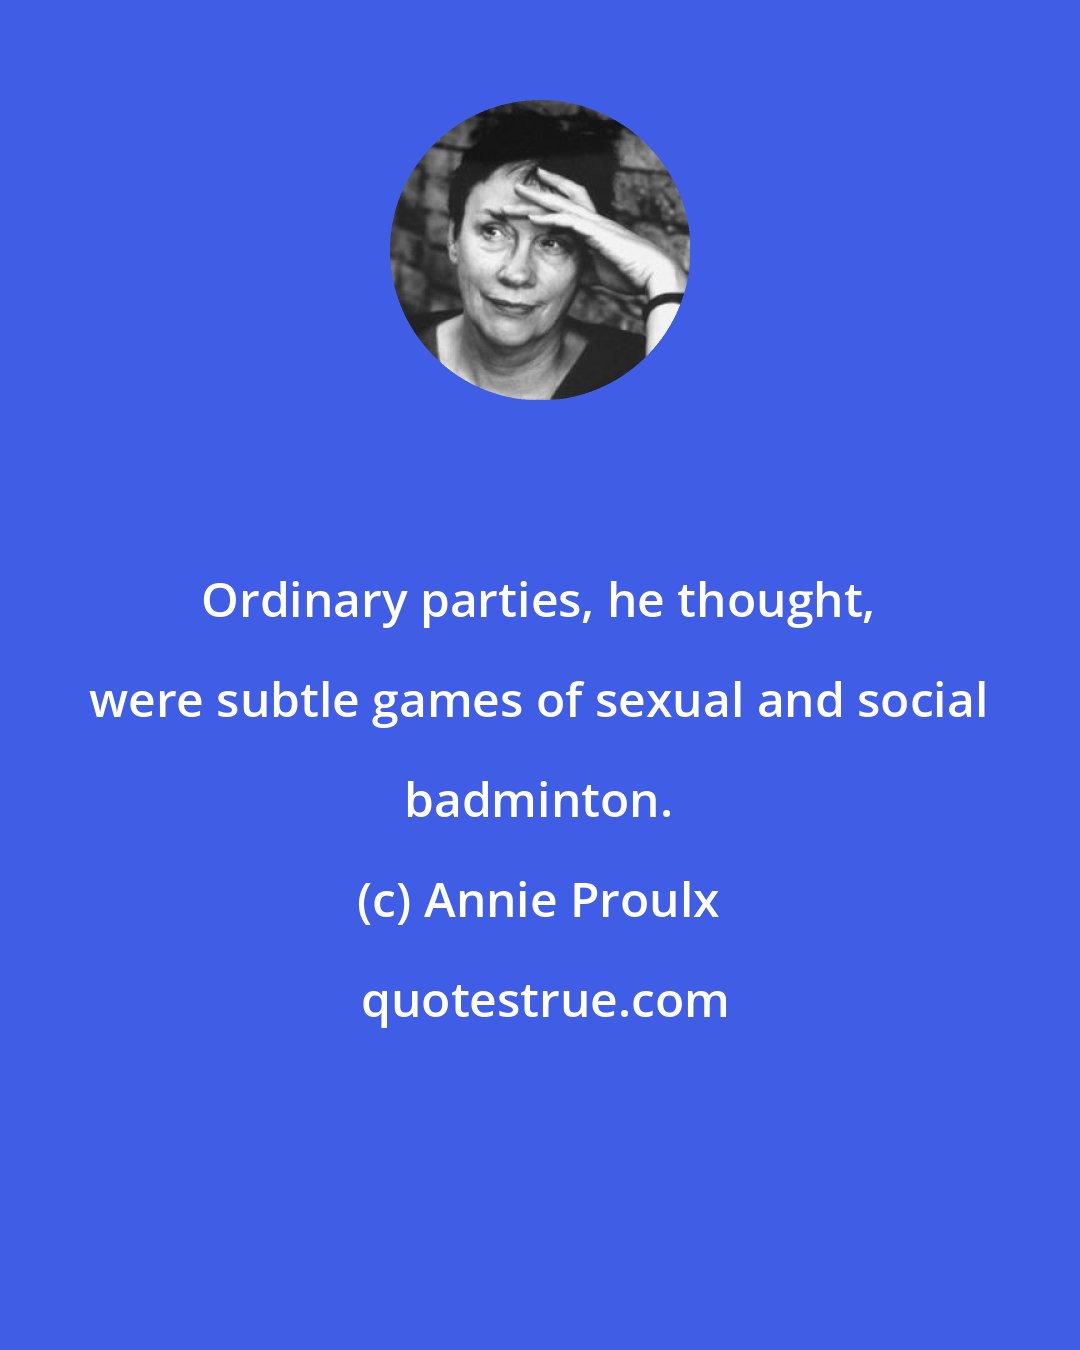 Annie Proulx: Ordinary parties, he thought, were subtle games of sexual and social badminton.